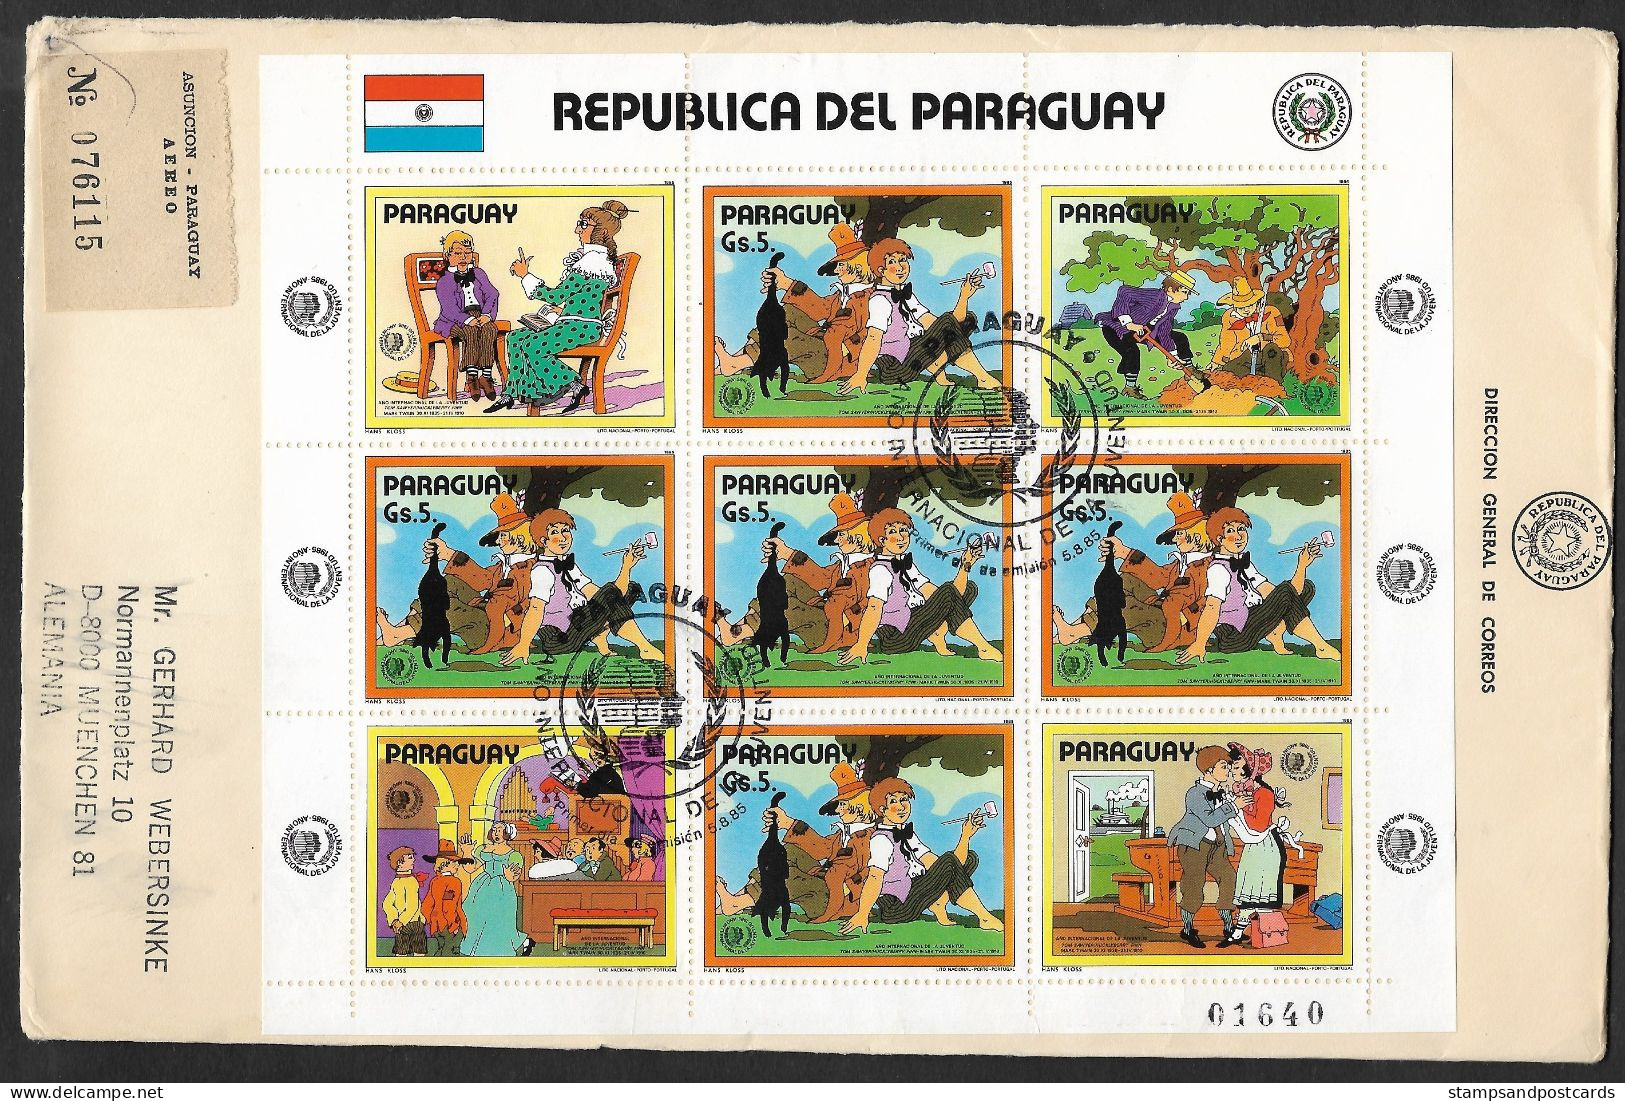 Paraguay 1985 FDC Recommandée Mark Twain Huckleberry Finn Tom Sawyer Année Internationale Jeunesse R FDC Int. Youth Year - Contes, Fables & Légendes